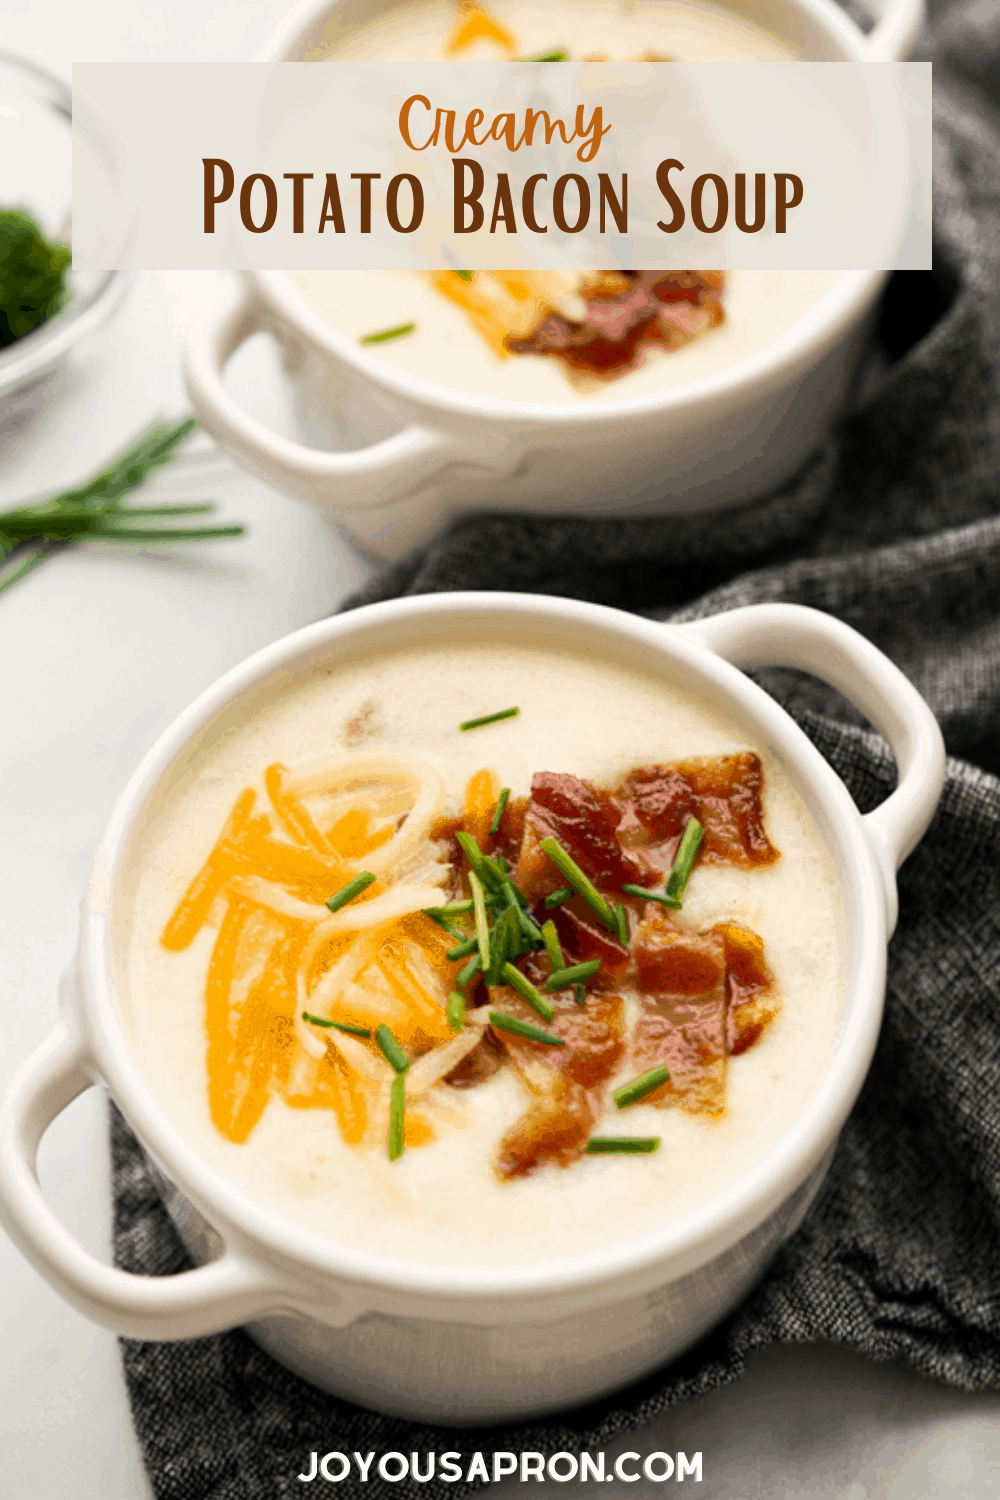 Creamy Potato Bacon Soup - cozy loaded baked potato soup! Chunky and creamy potato soup with bacon, cheese, sour cream and chives. Cozy and comforting, it's loaded potato in soup form! via @joyousapron